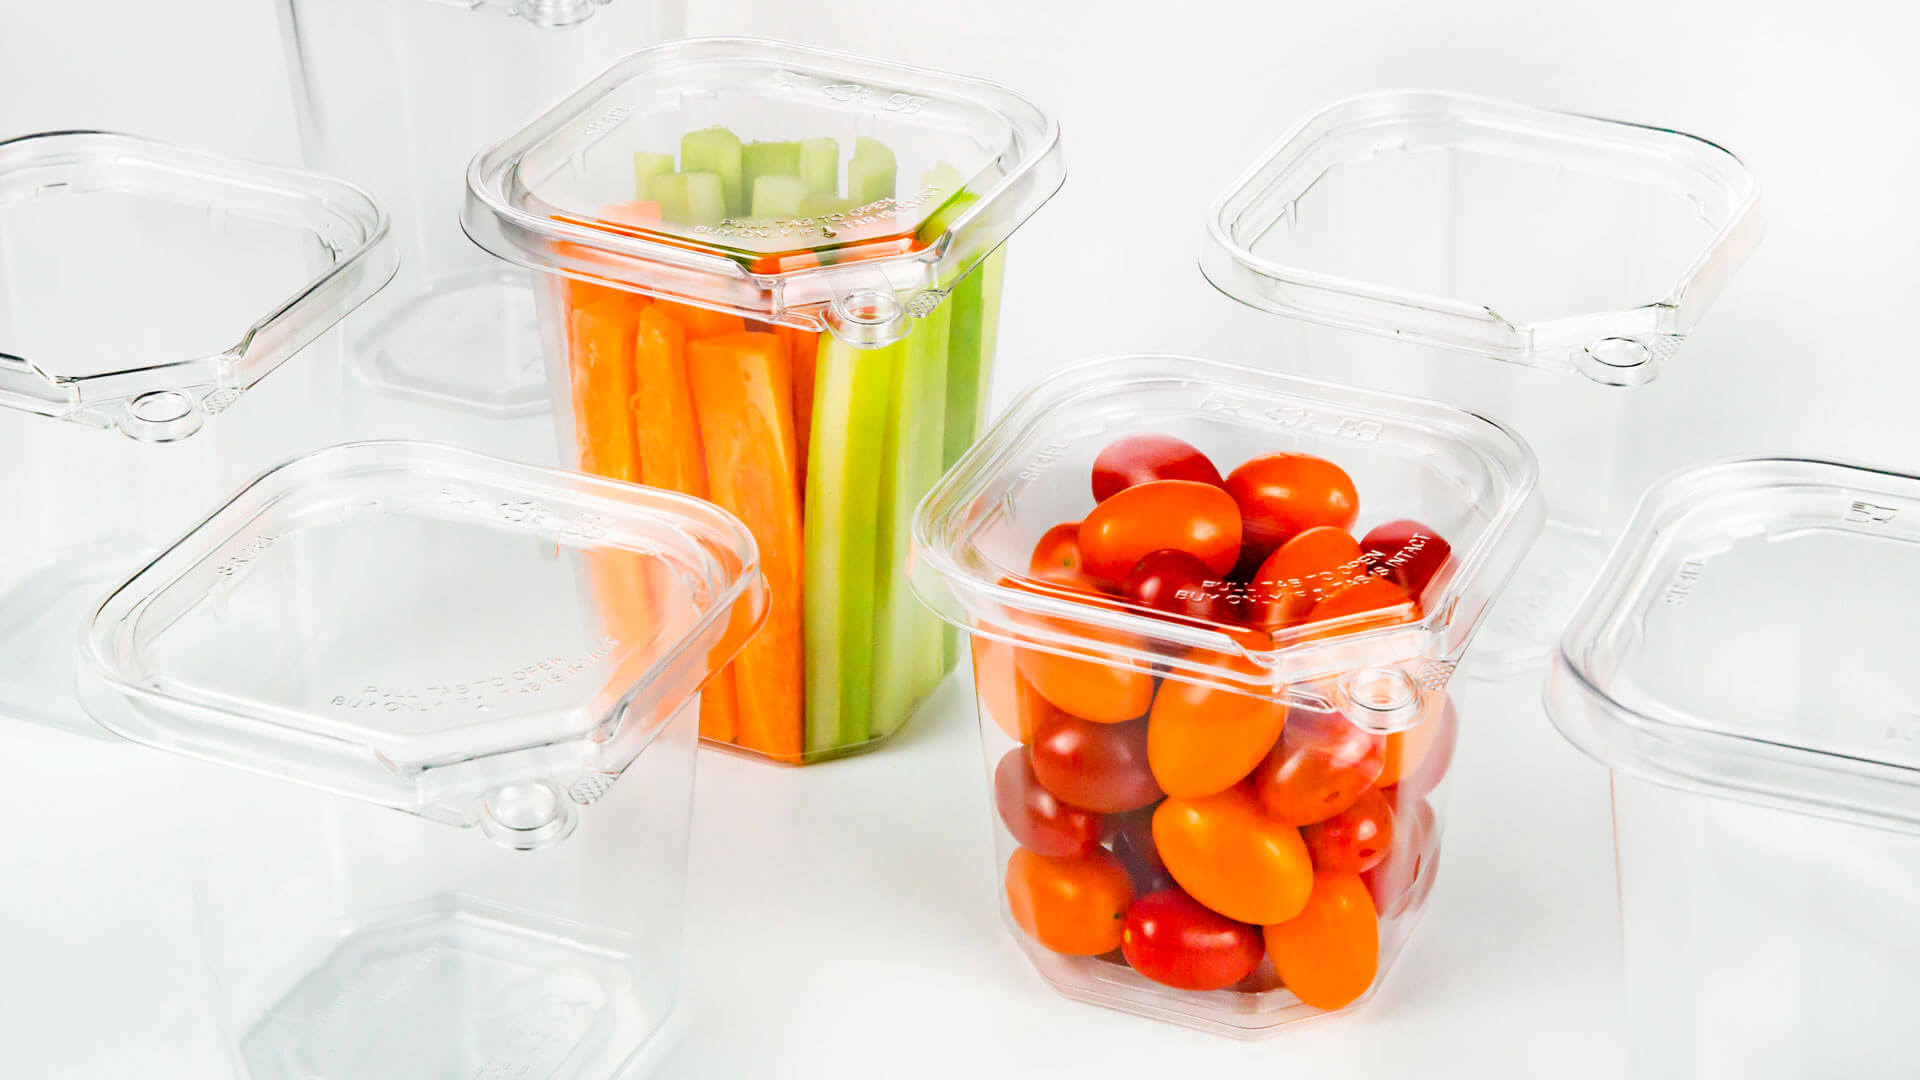 Choice 24 oz. Clear RPET Hinged Deli Container - 50/Pack